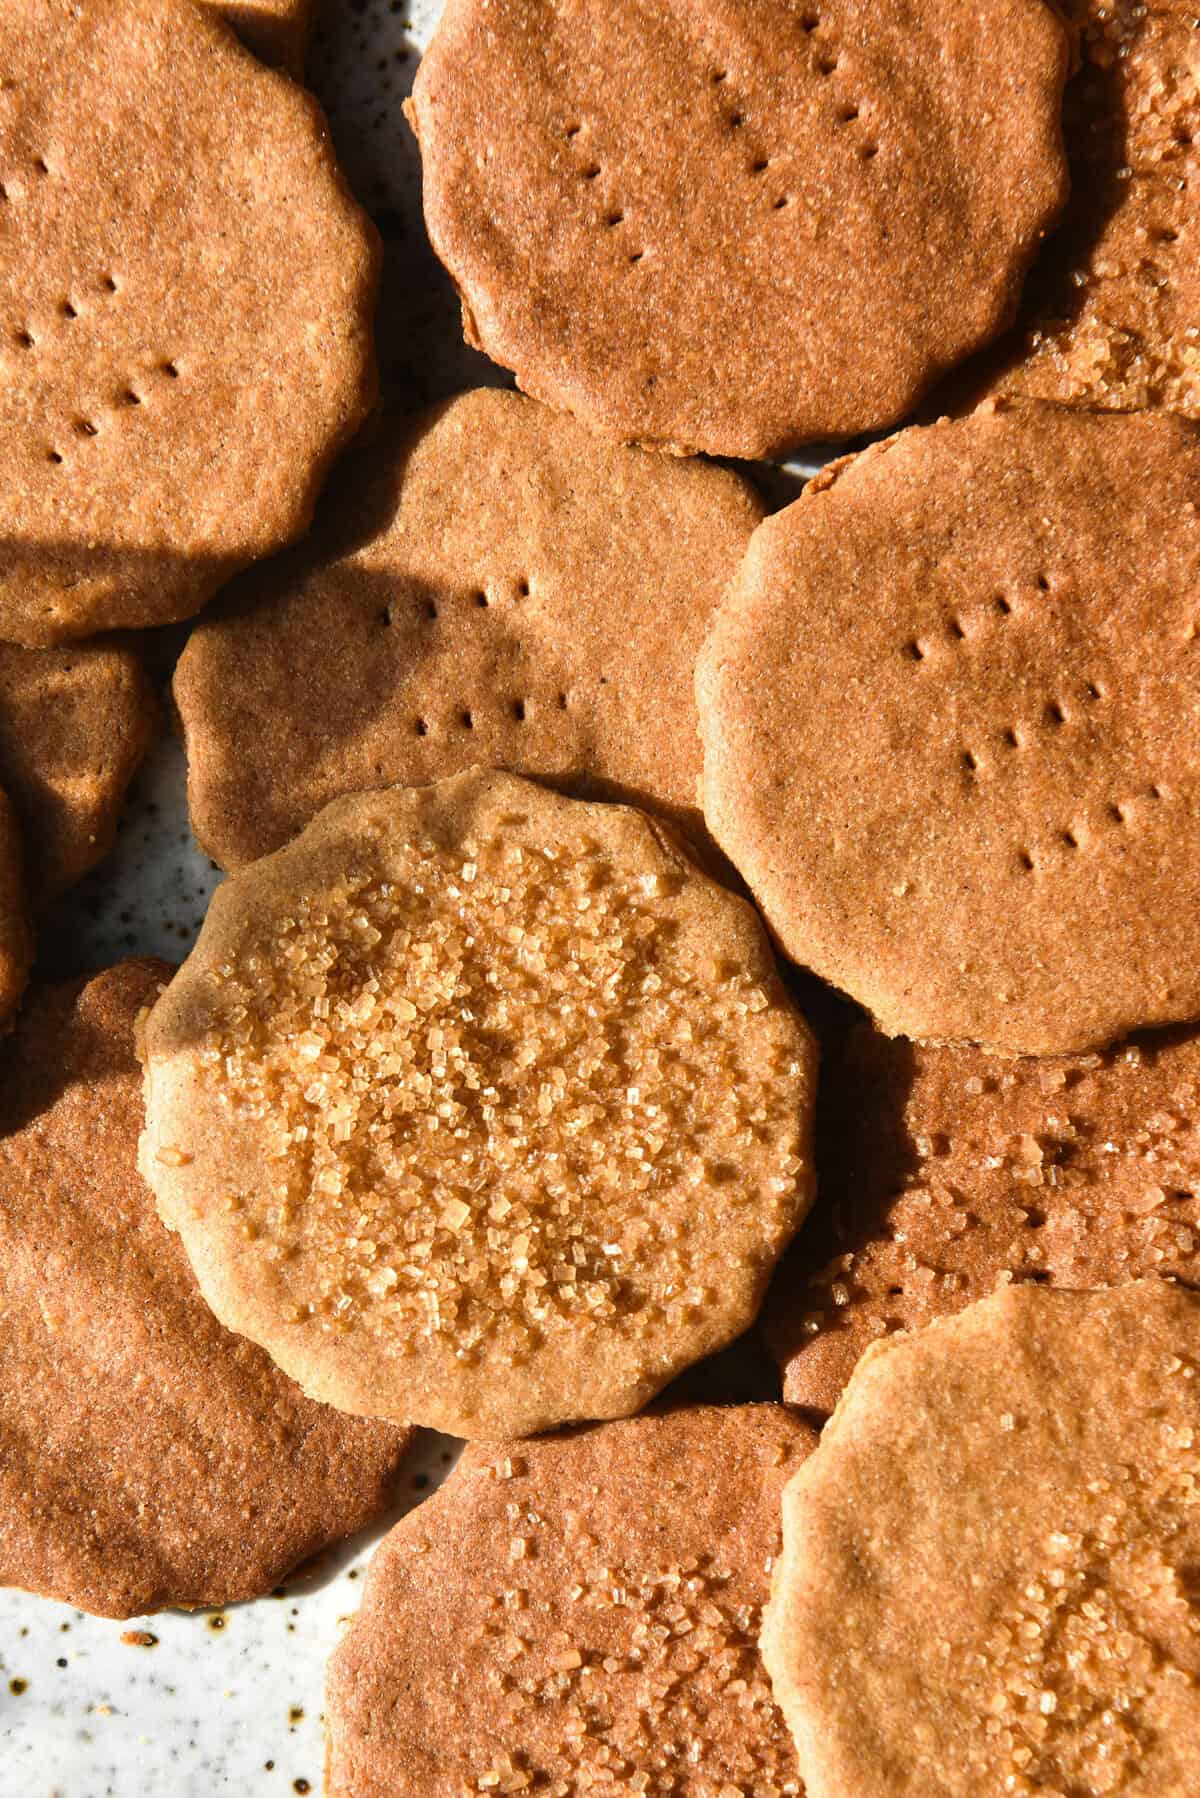 An aerial sunlit close up view of a plate of gluten free graham crackers topped with finishing sugar